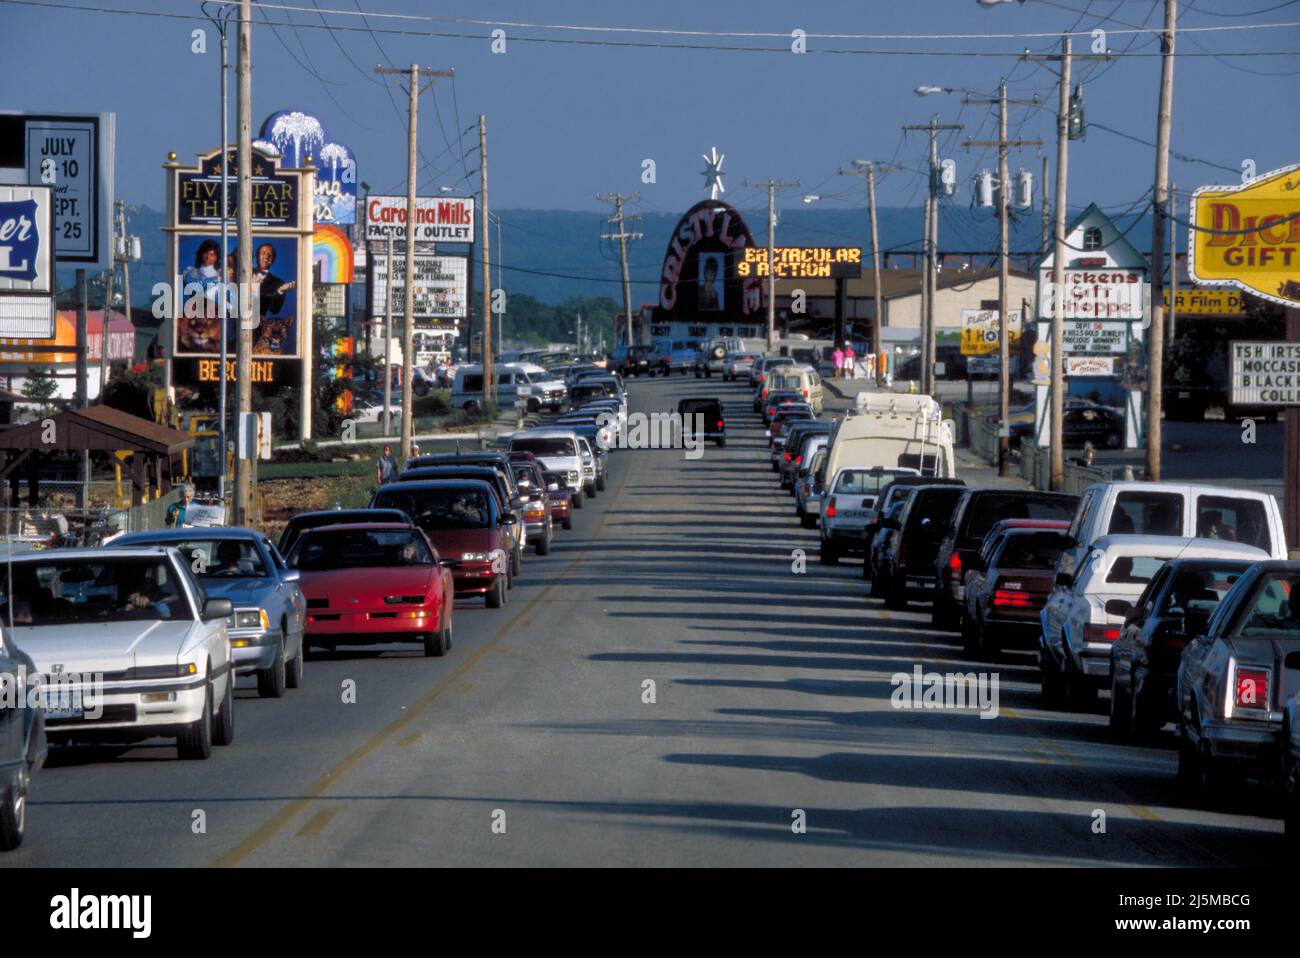 Branson, Missouri USA July 16, 1994: Traffic on Highway 76 in Branson, Missouri moved at a snail's pace at times following the 'Branson boom' when dozens of music theatres and entertainment venues were built.. Stock Photo